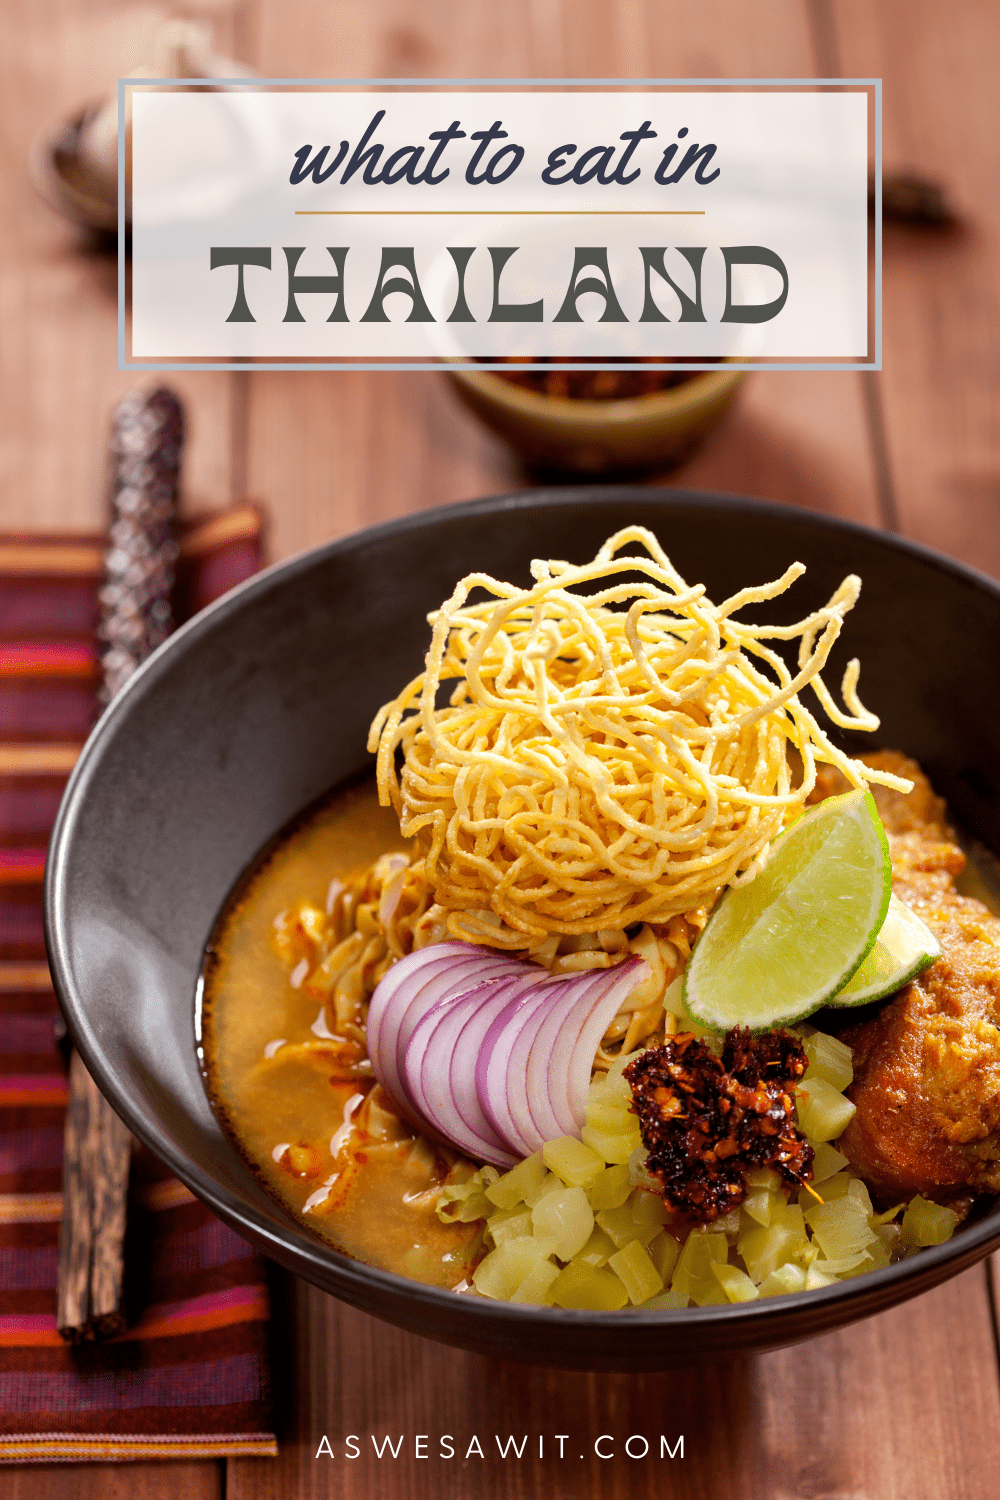 bowl of khao soi soup topped with a pile of crunchy noodles. Text overlay says "what to eat in Thailand"